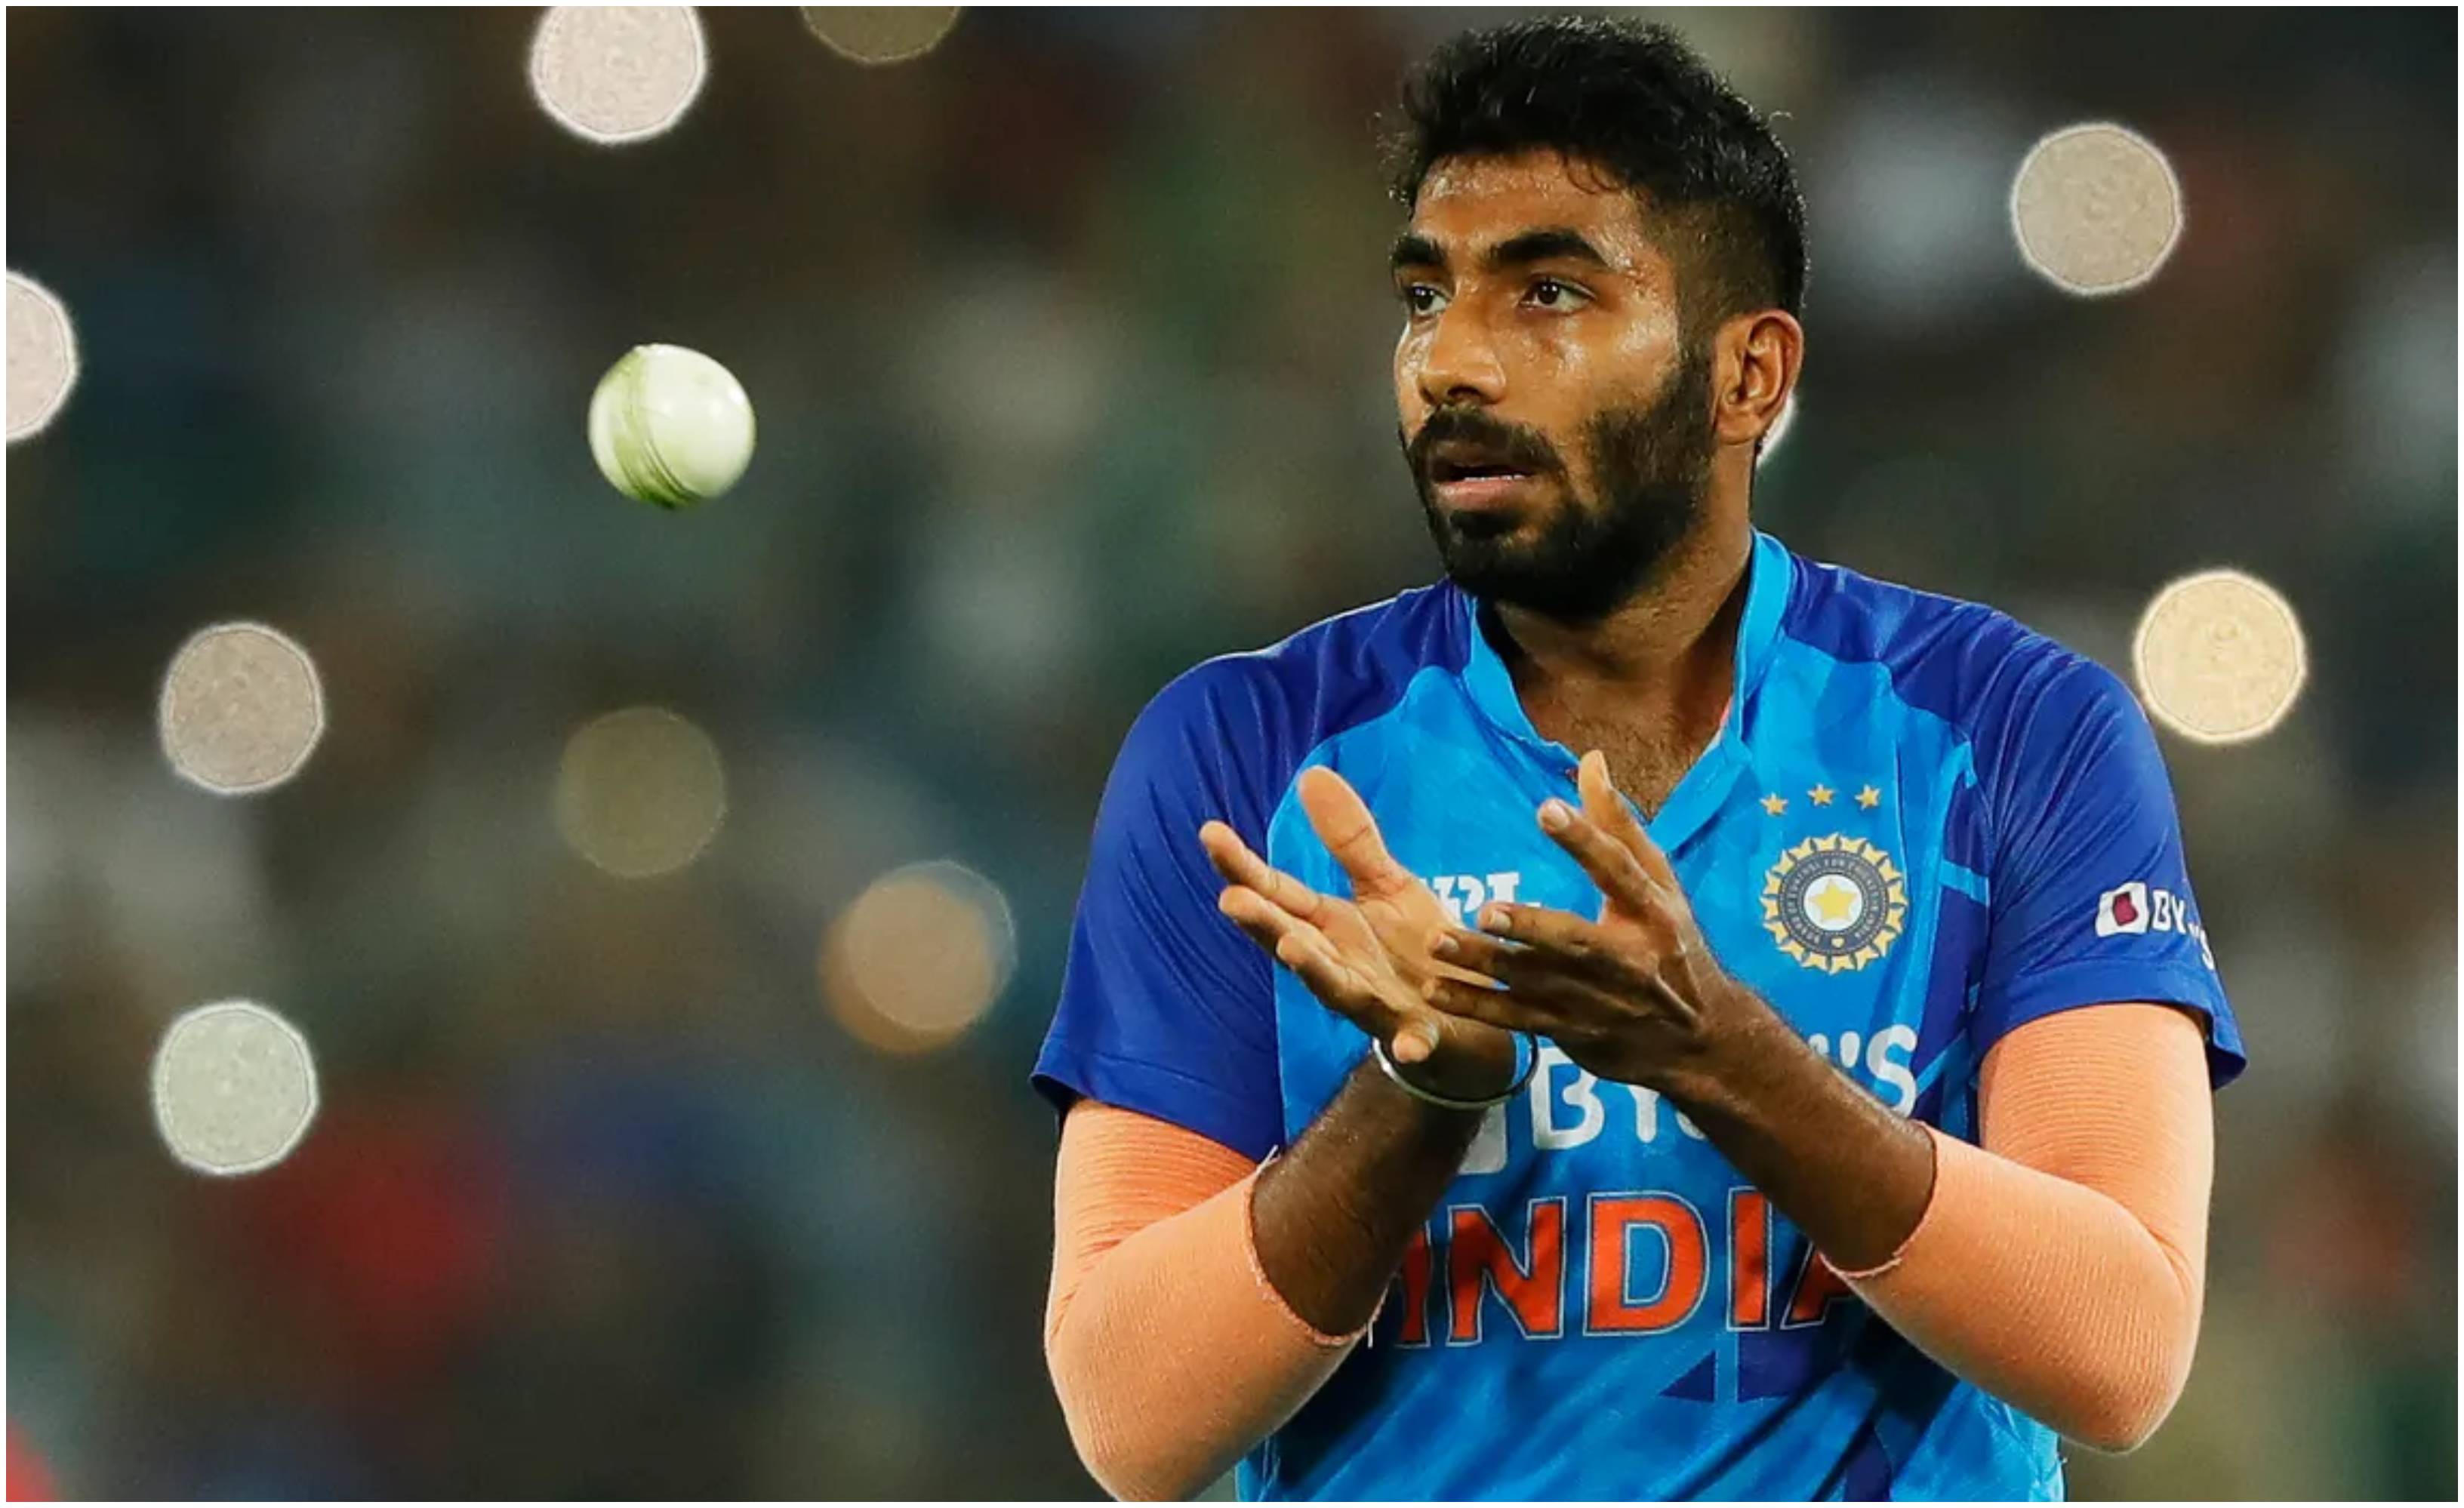 INDIA T20 WC Squad: Big Question mark on BCCI’s INJURY Management skills, former cricketers including Wasim Jaffer point fingers at Team Management & Board: CHECK OUT